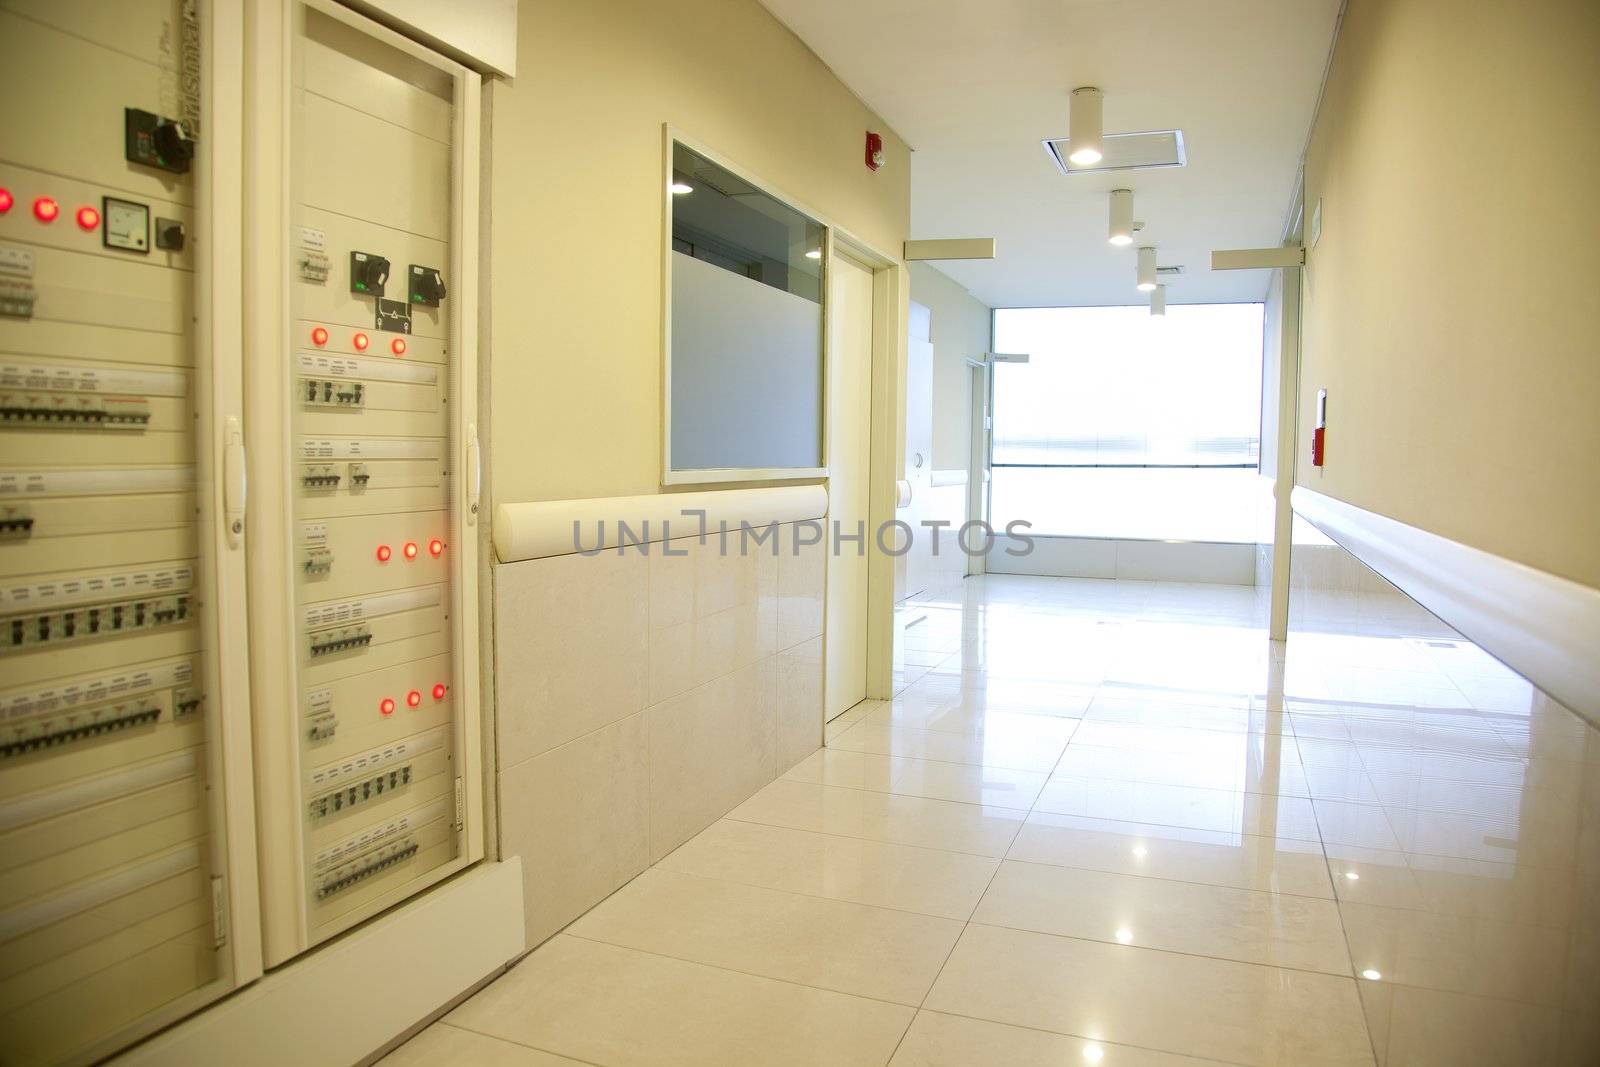 A hospital hallway with an electronics cabinet and bright window